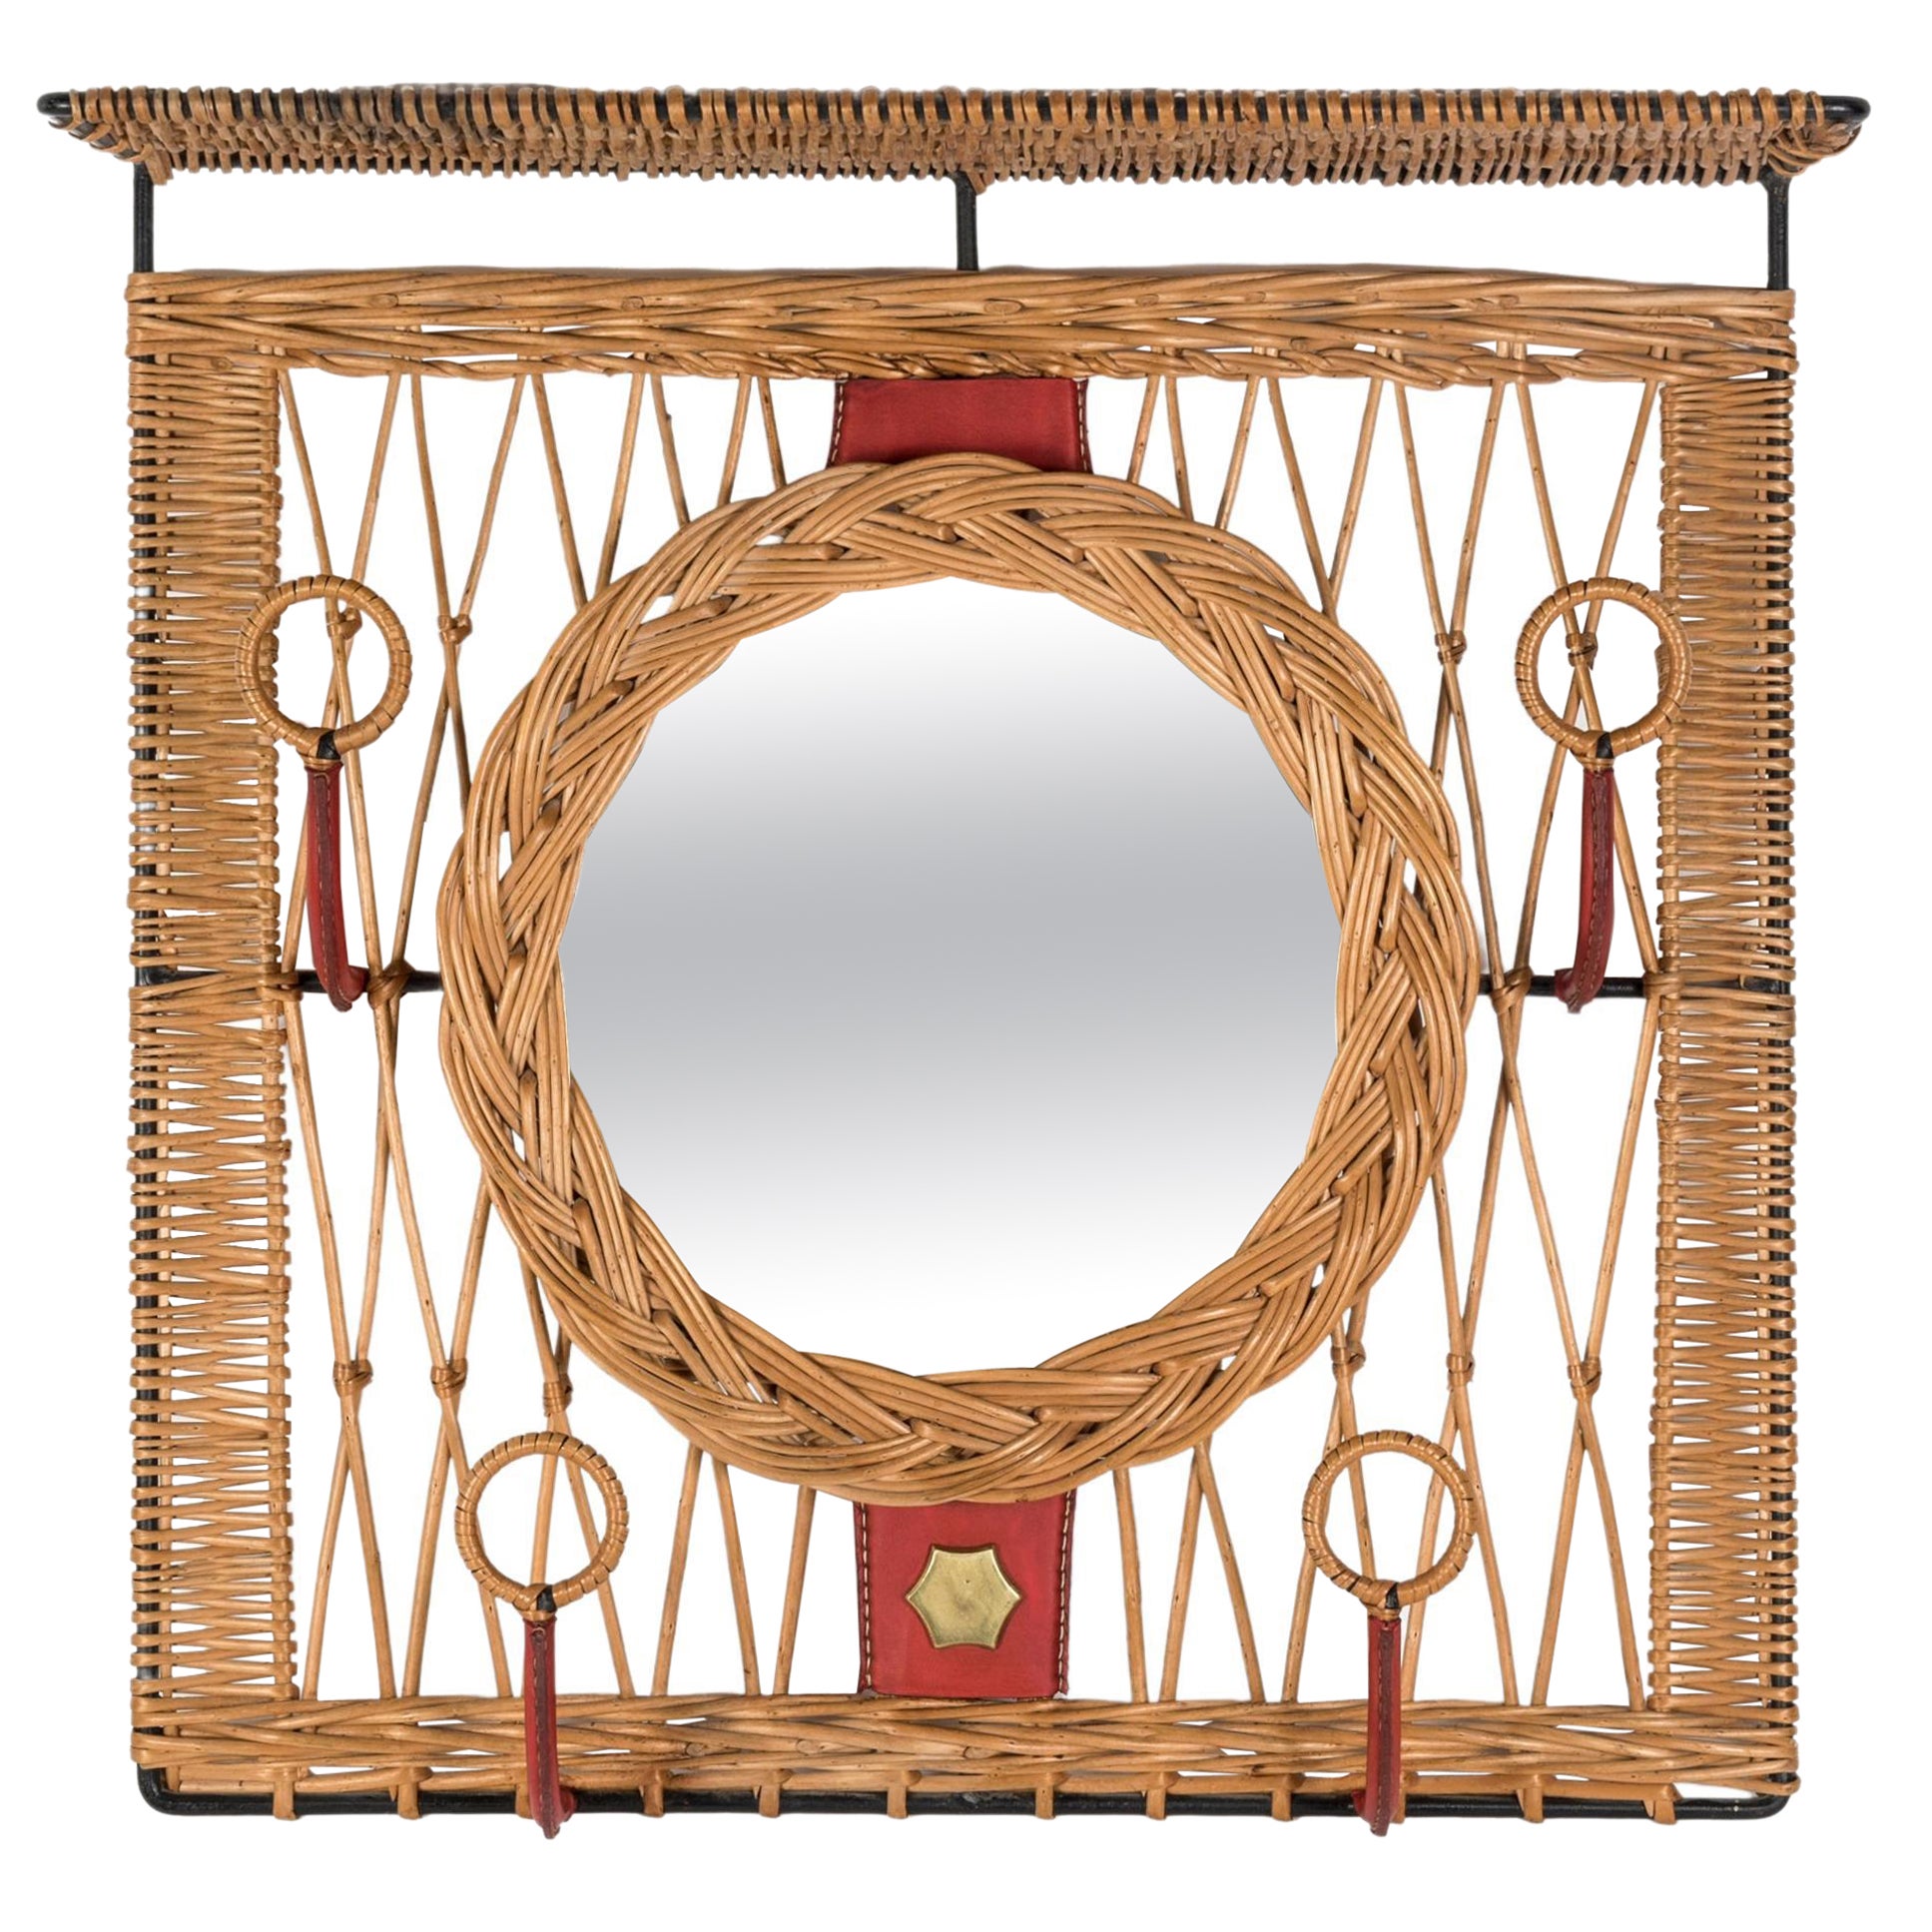 1950's Stitched leather and rattan wall mirror by Jacques Adnet For Sale